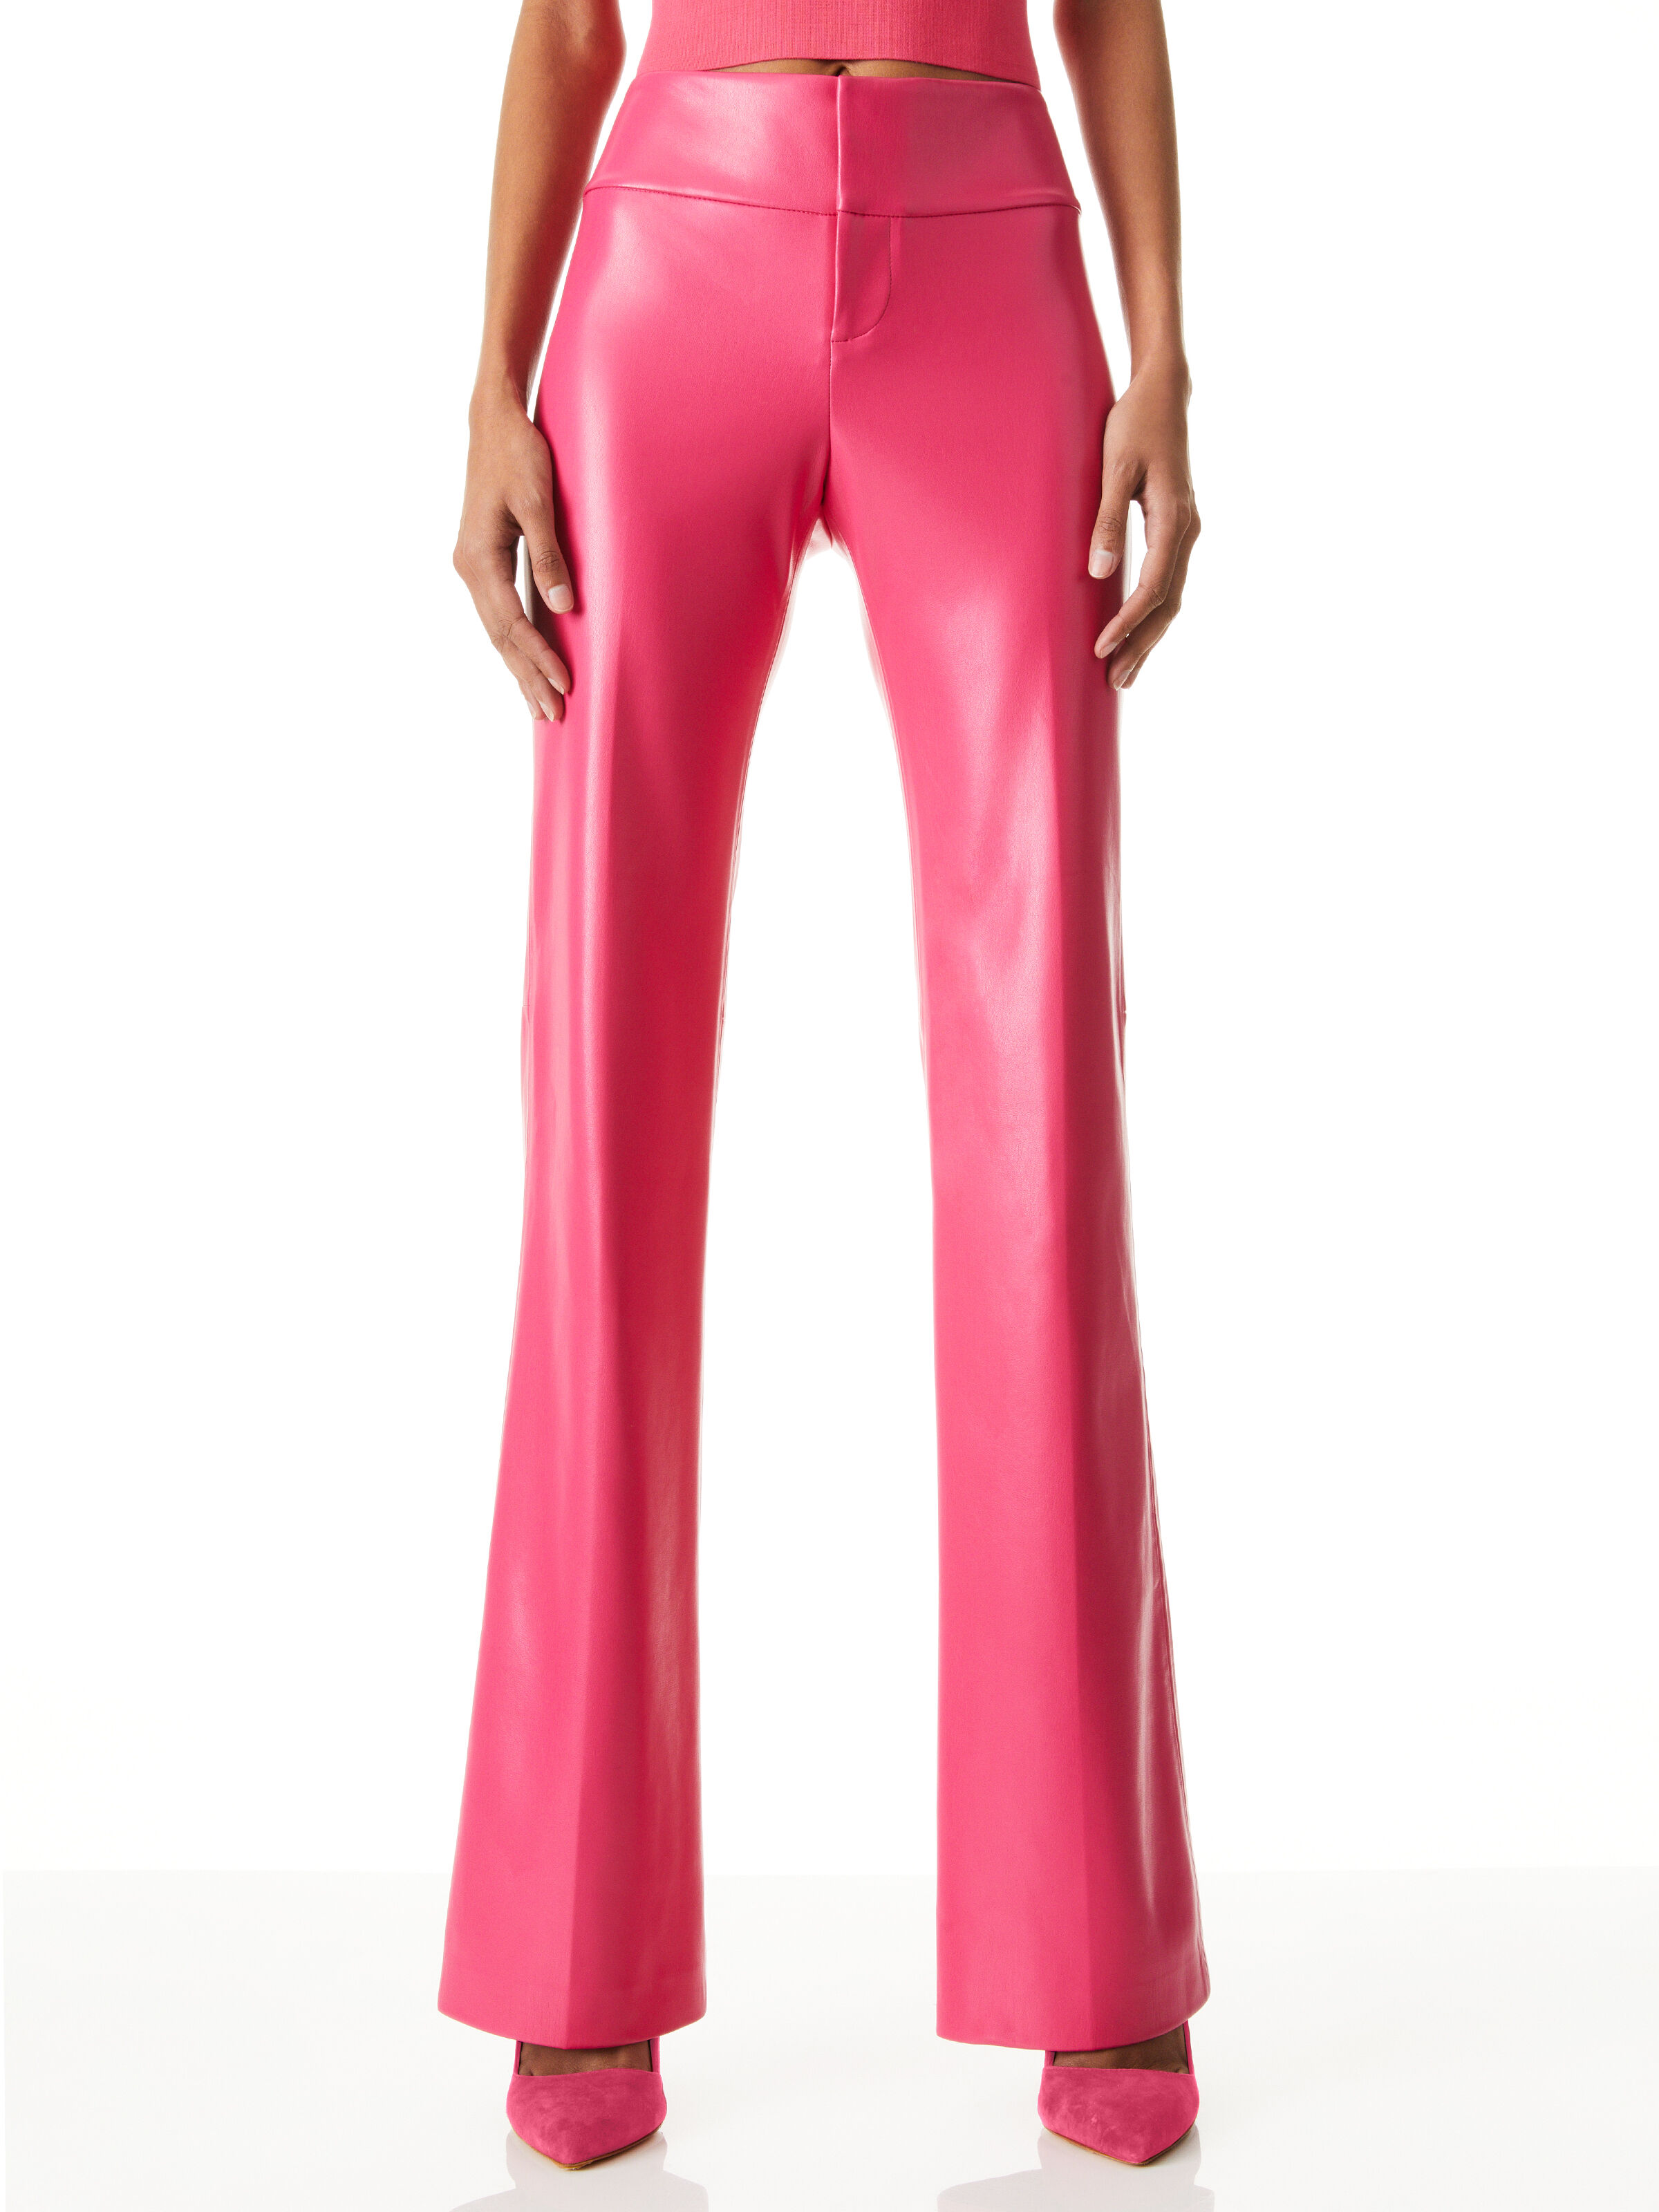 Hot in Here Faux Leather Pants | Nasty Gal